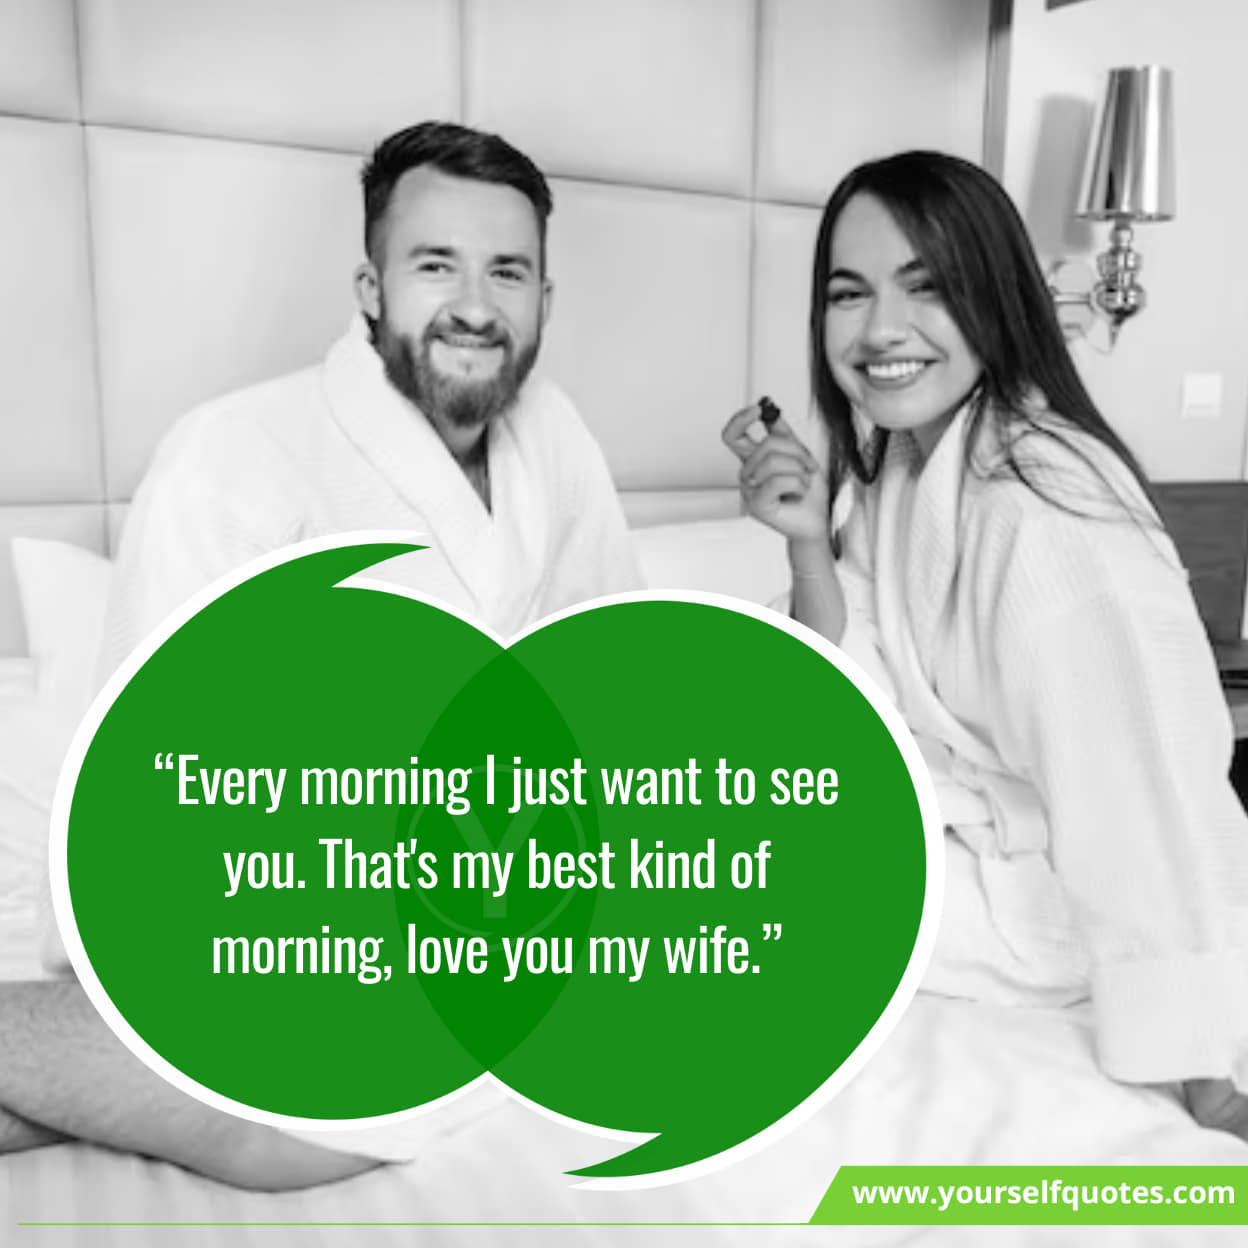 Inspirational Good Morning Message for Wife